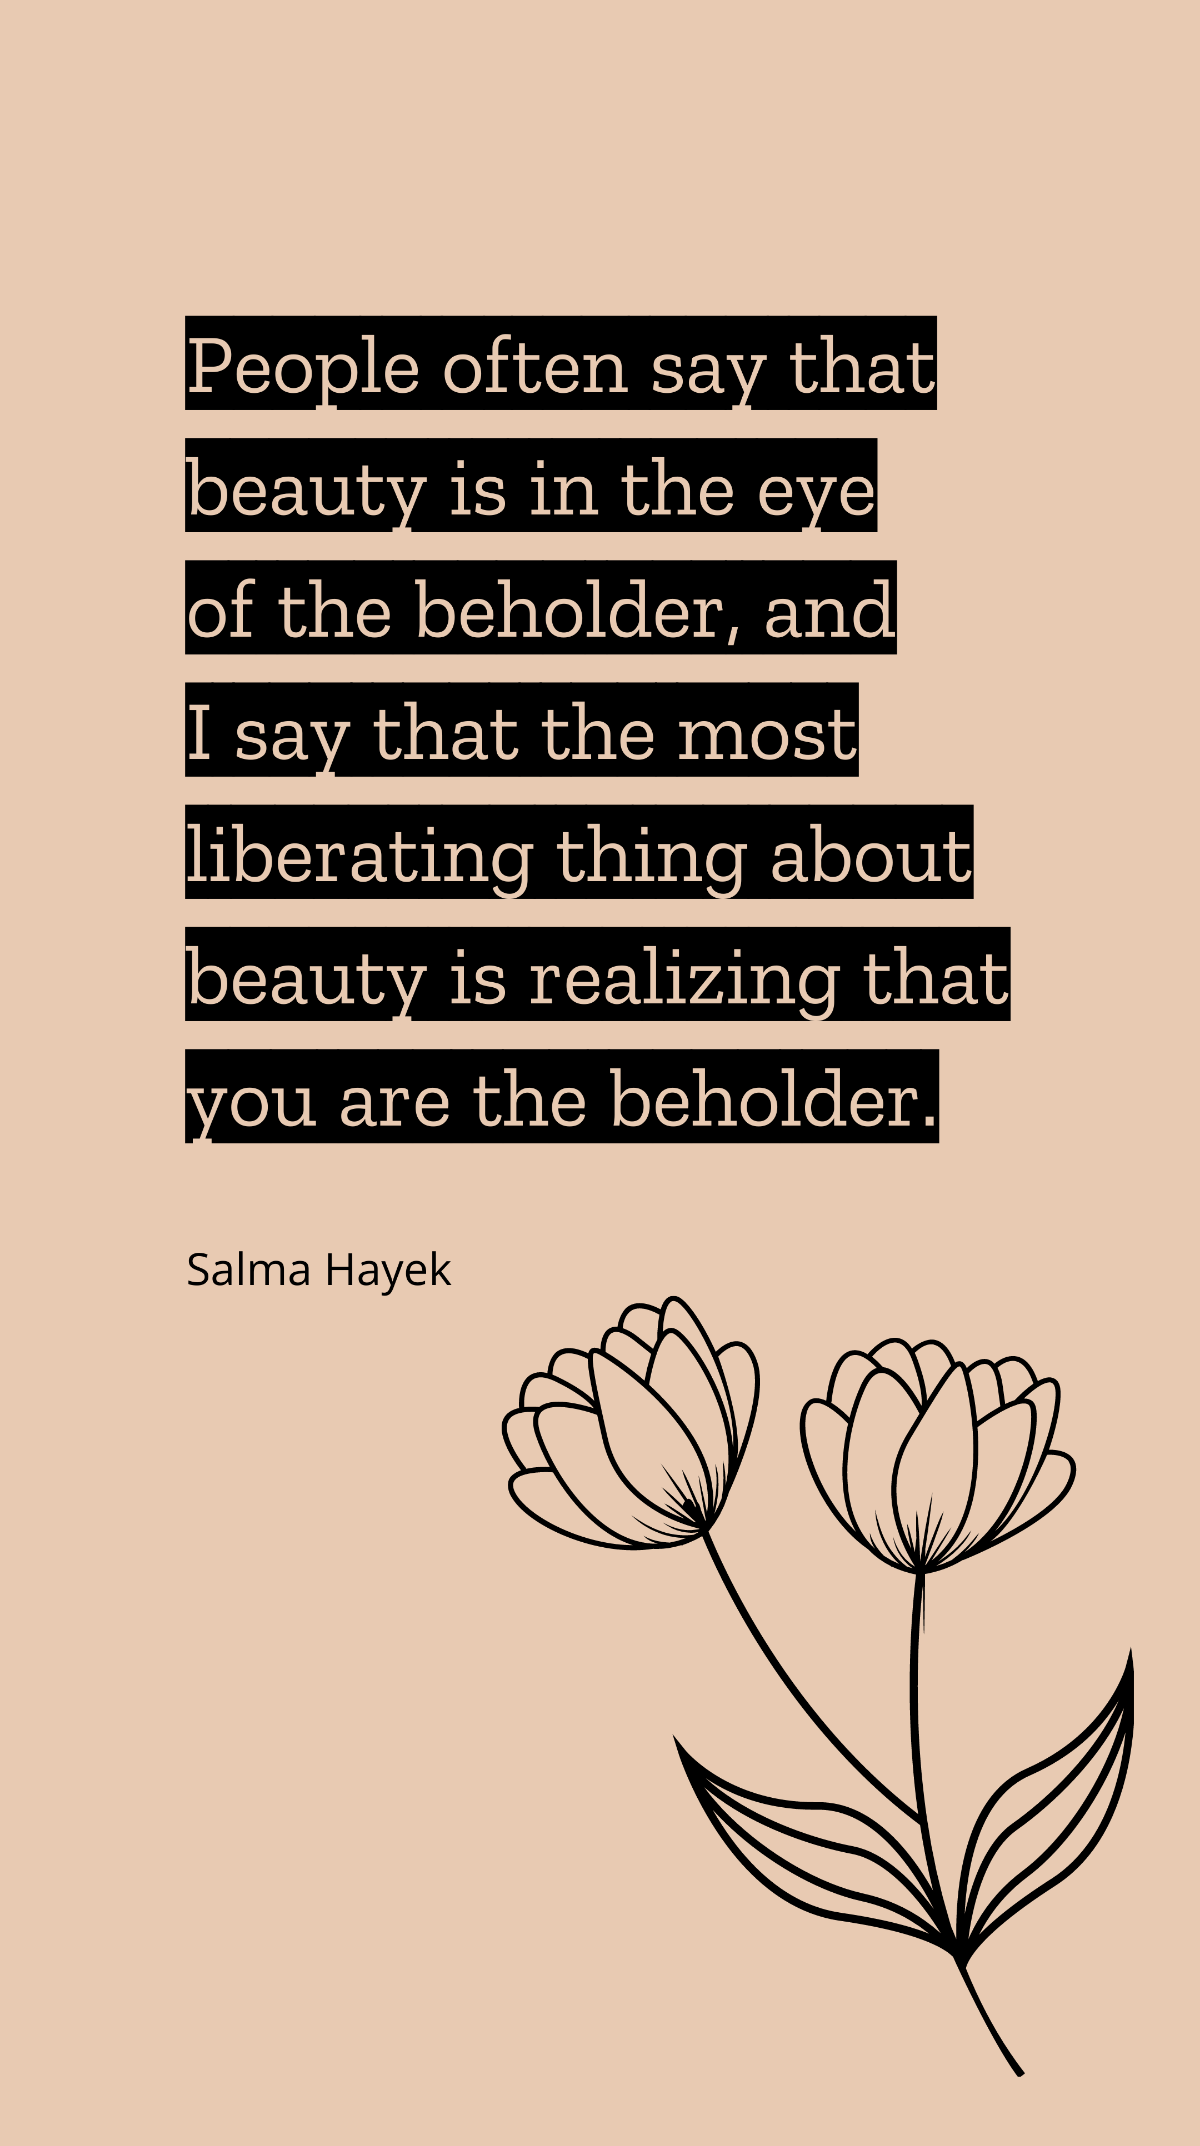 Salma Hayek - People often say that beauty is in the eye of the beholder, and I say that the most liberating thing about beauty is realizing that you are the beholder.